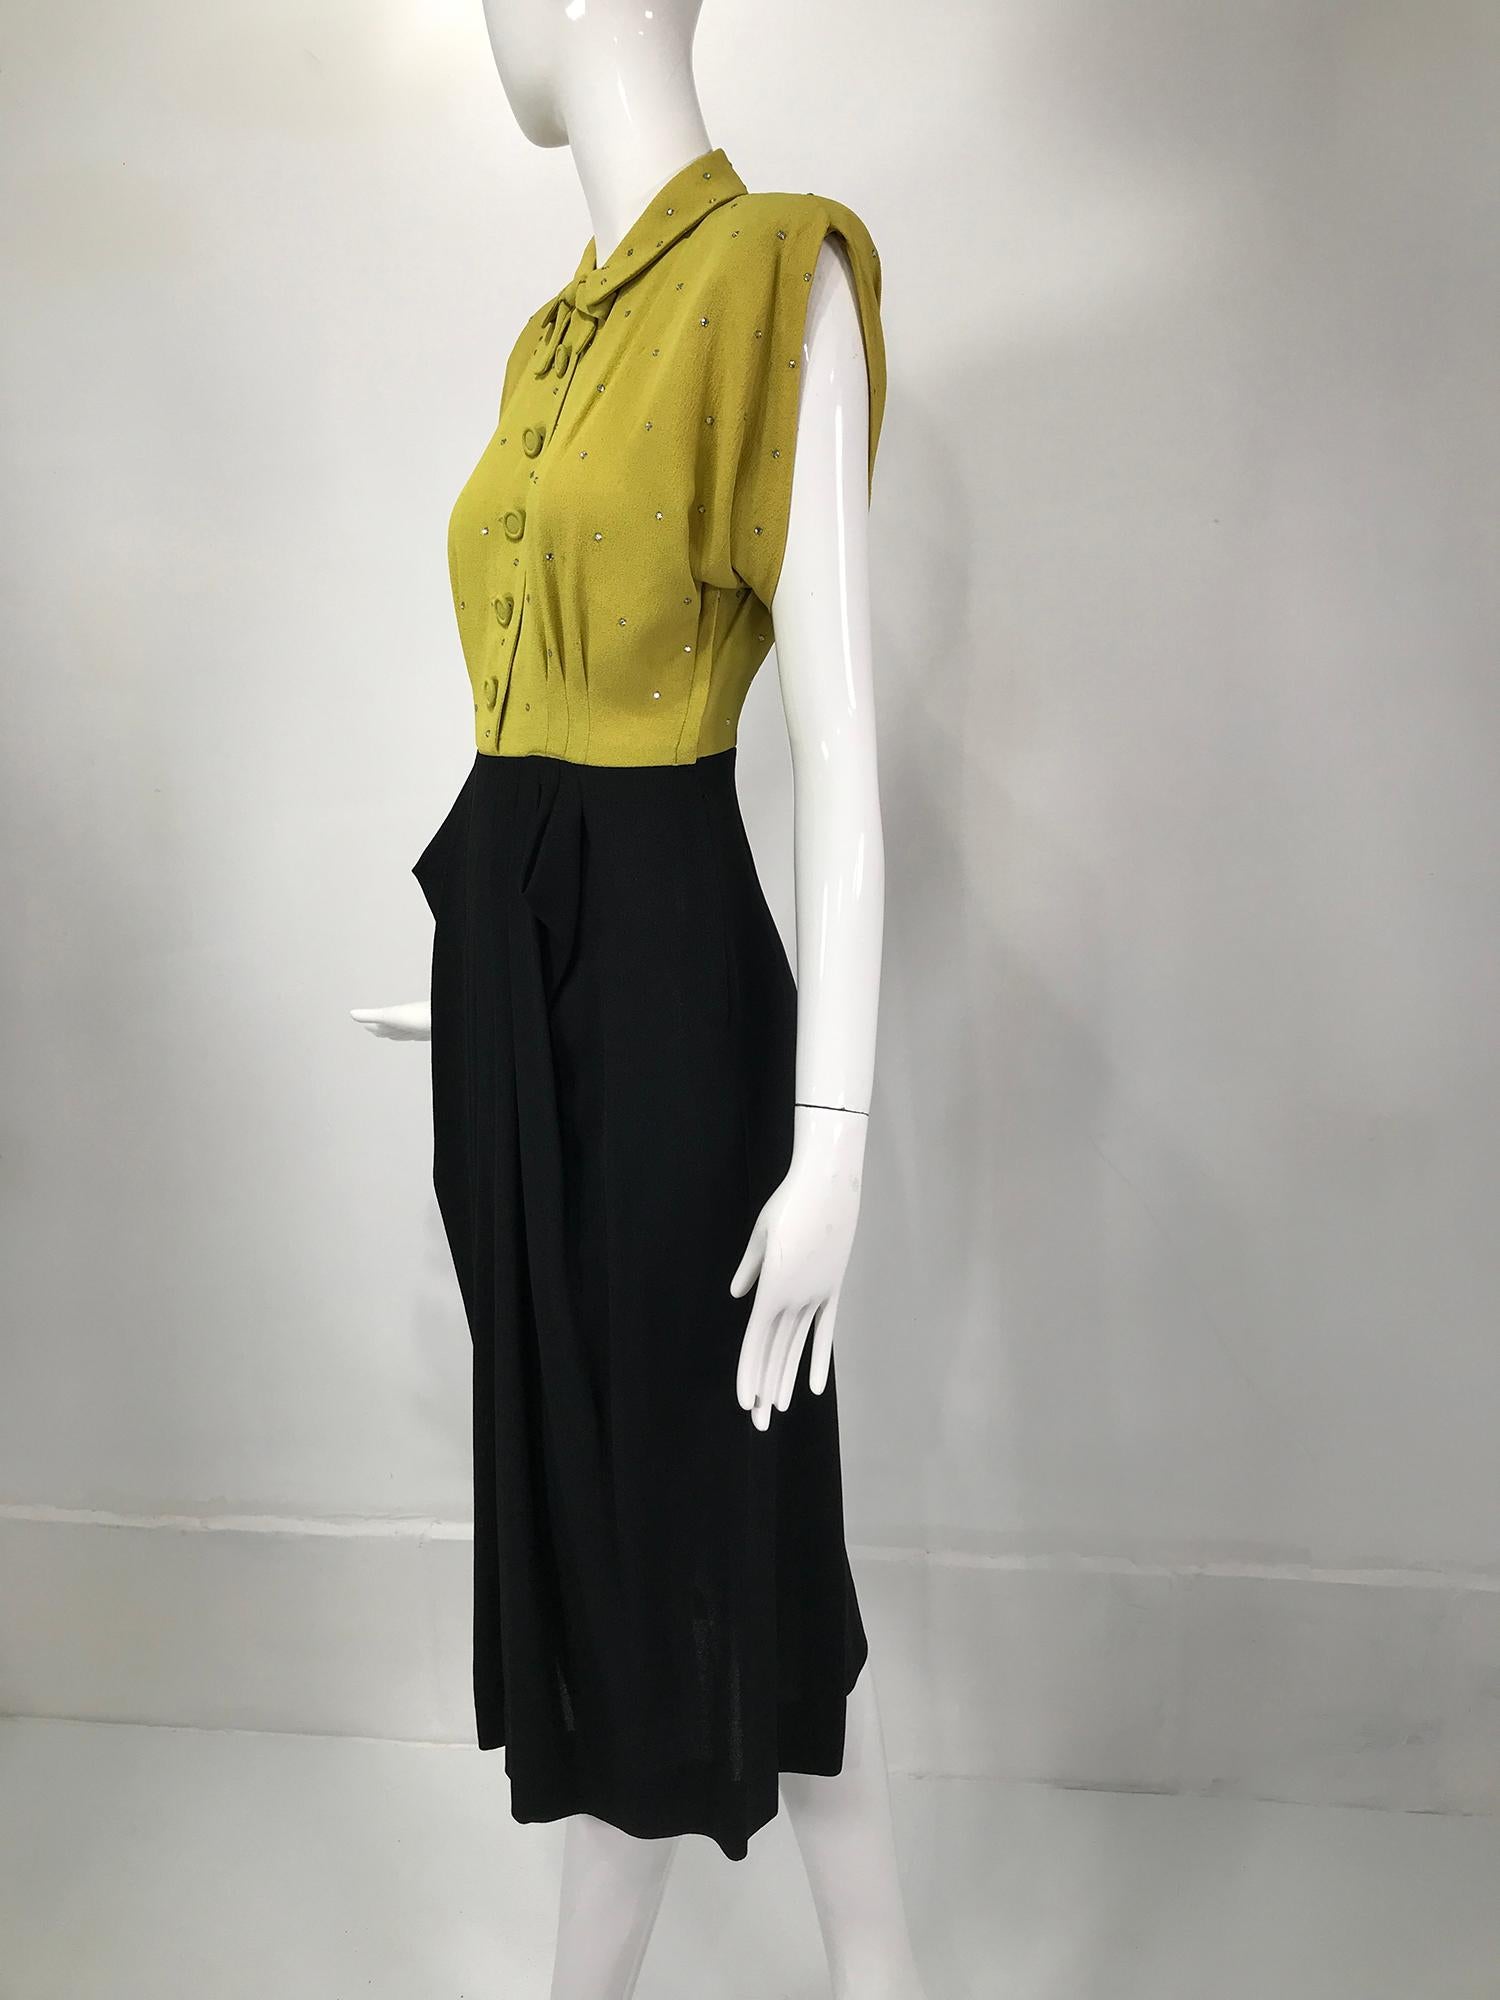 Original Paramount Junior Chicago 1940s Chartreuse & Black Crepe Dress  In Good Condition For Sale In West Palm Beach, FL